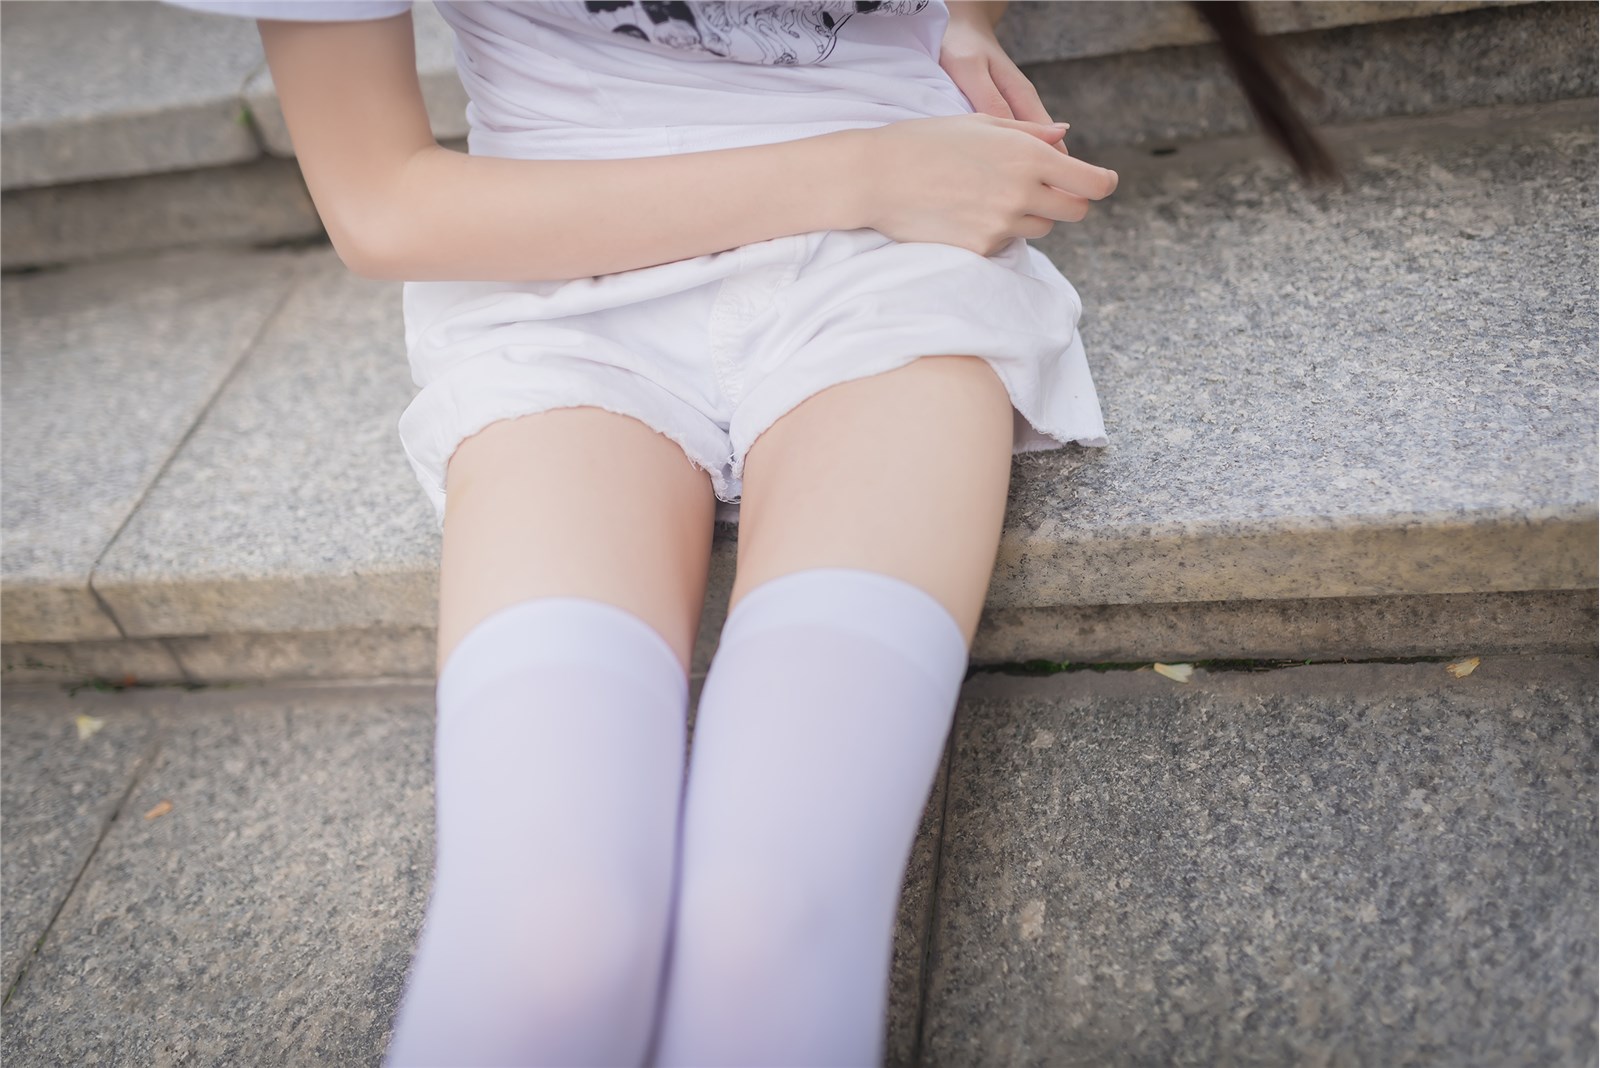 Rabbit plays with painted white stockings over the knee(7)